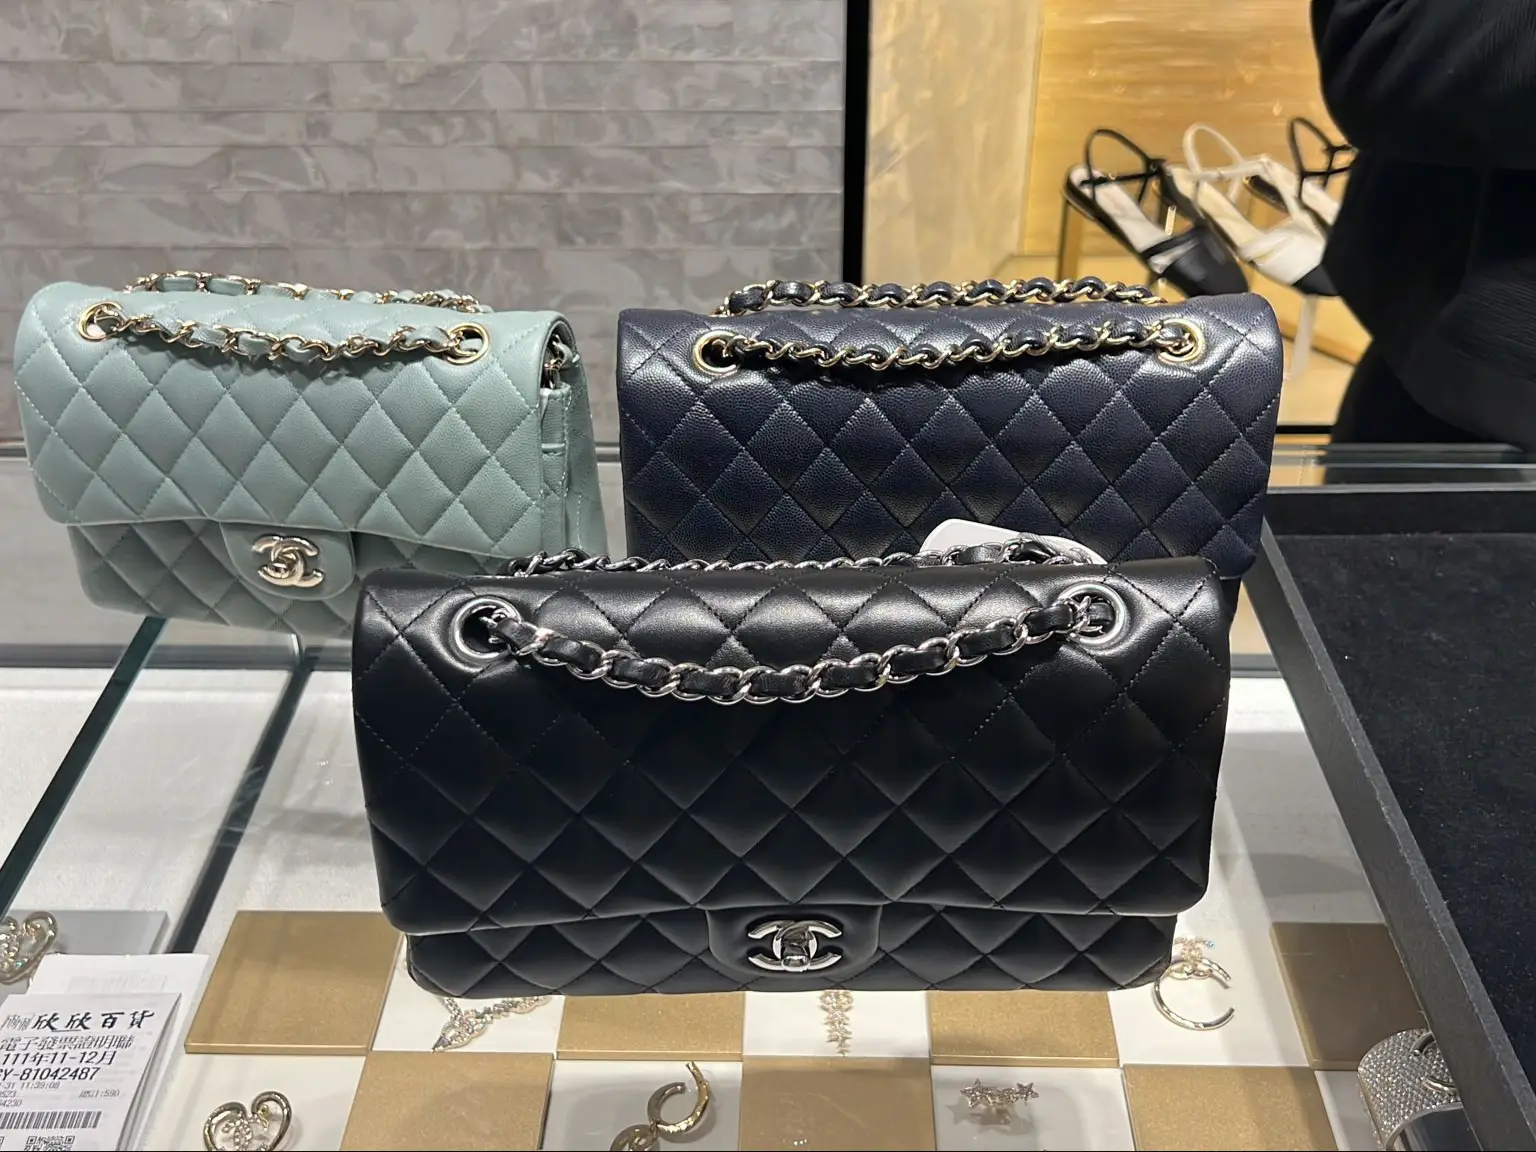 How to get a tax refund on purchases from Louis Vuitton and Chanel